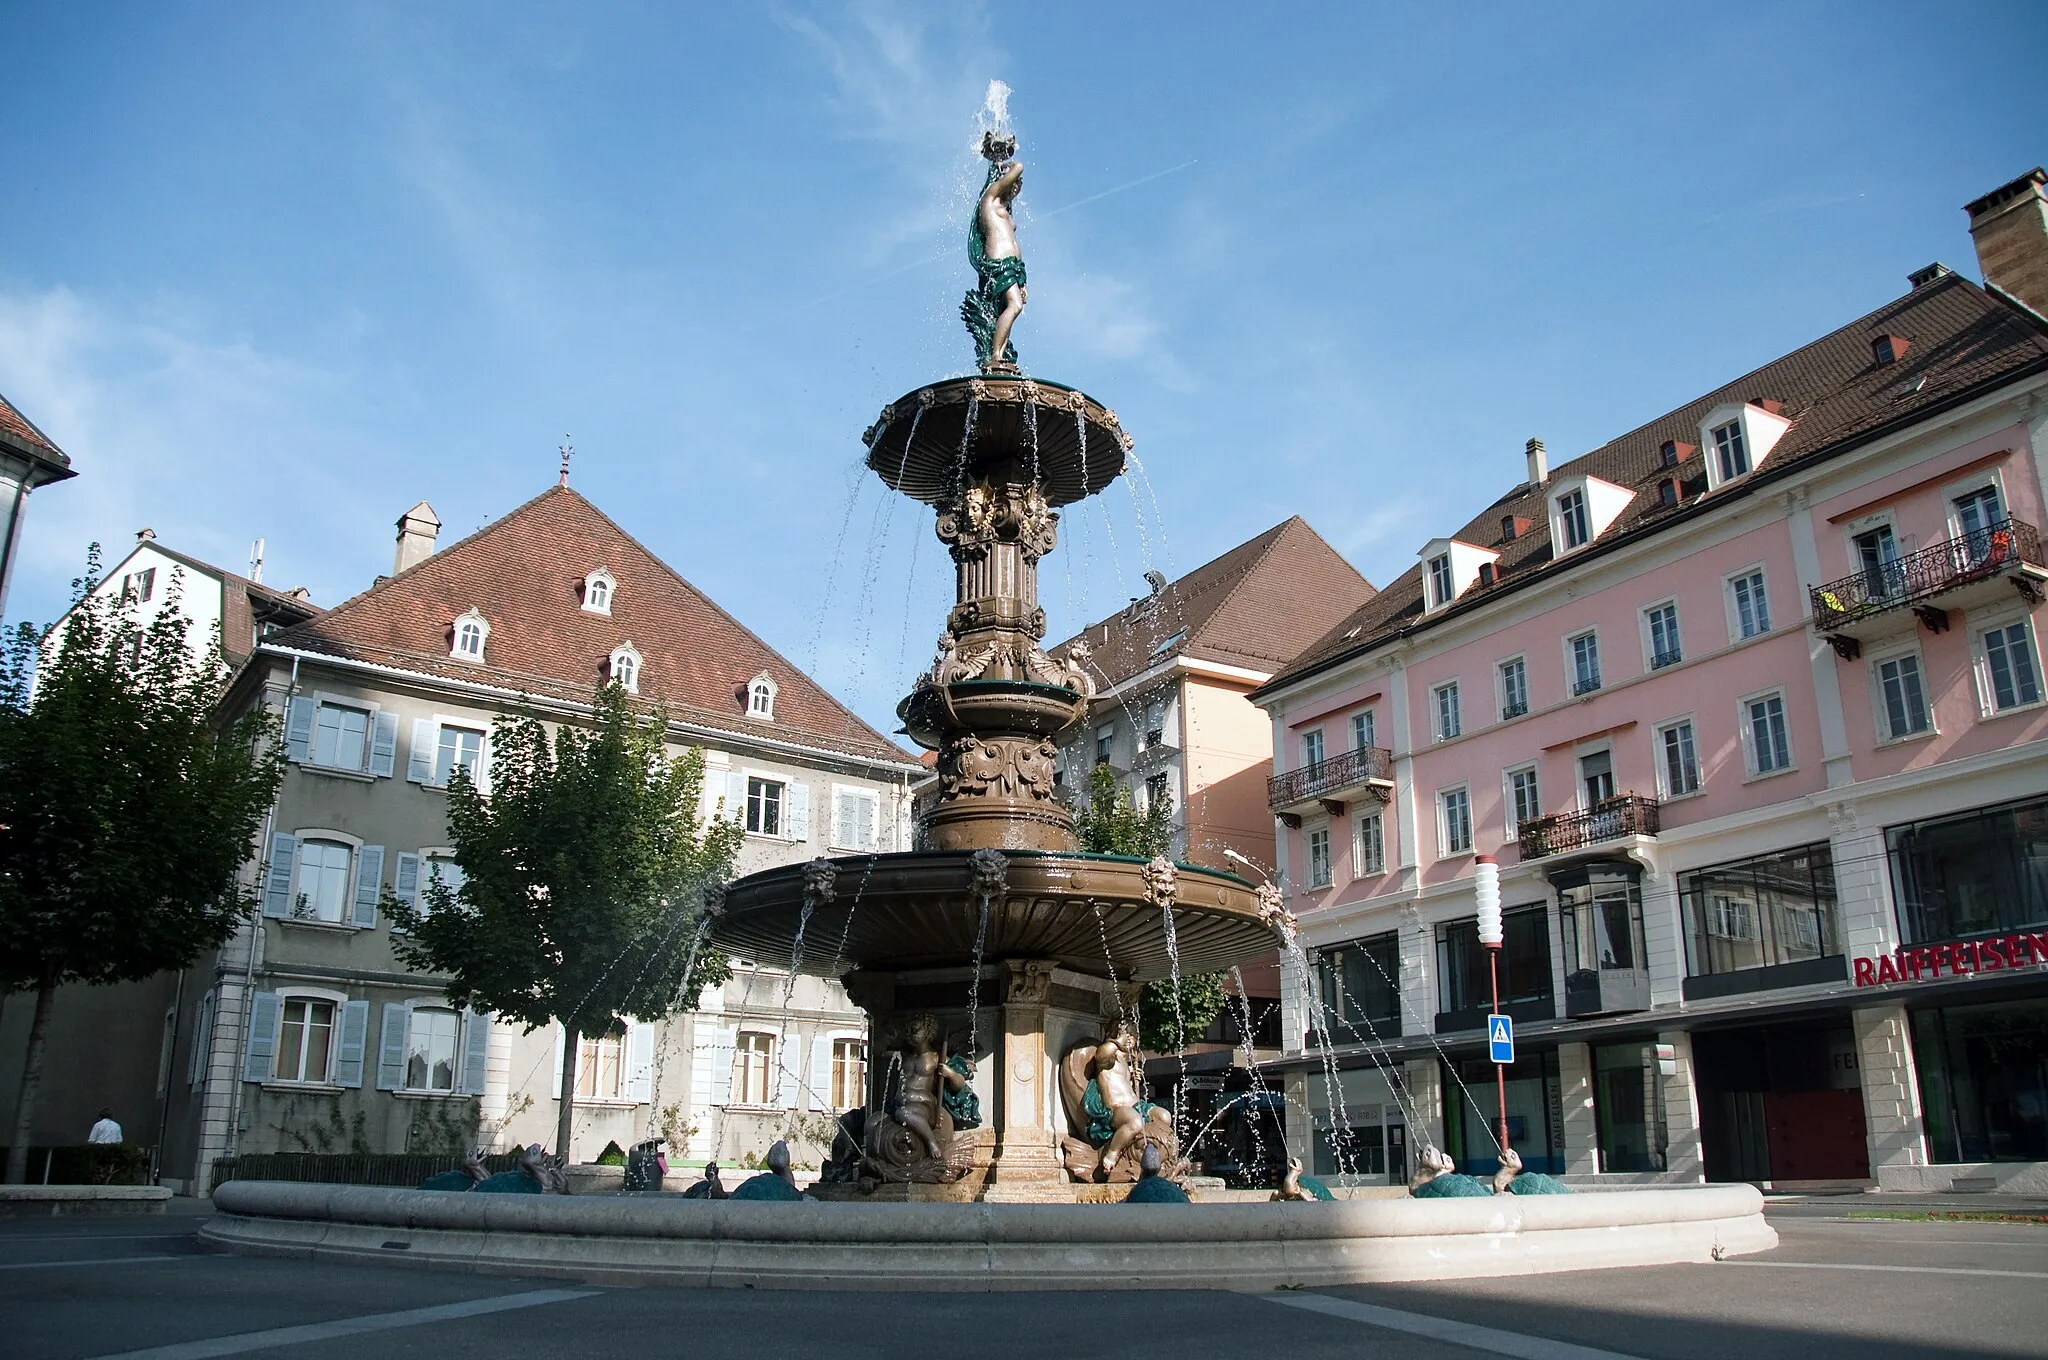 Photo showing: A photo of the Grande Fontaine in the town of La Chaux de Fonds, Switzerland